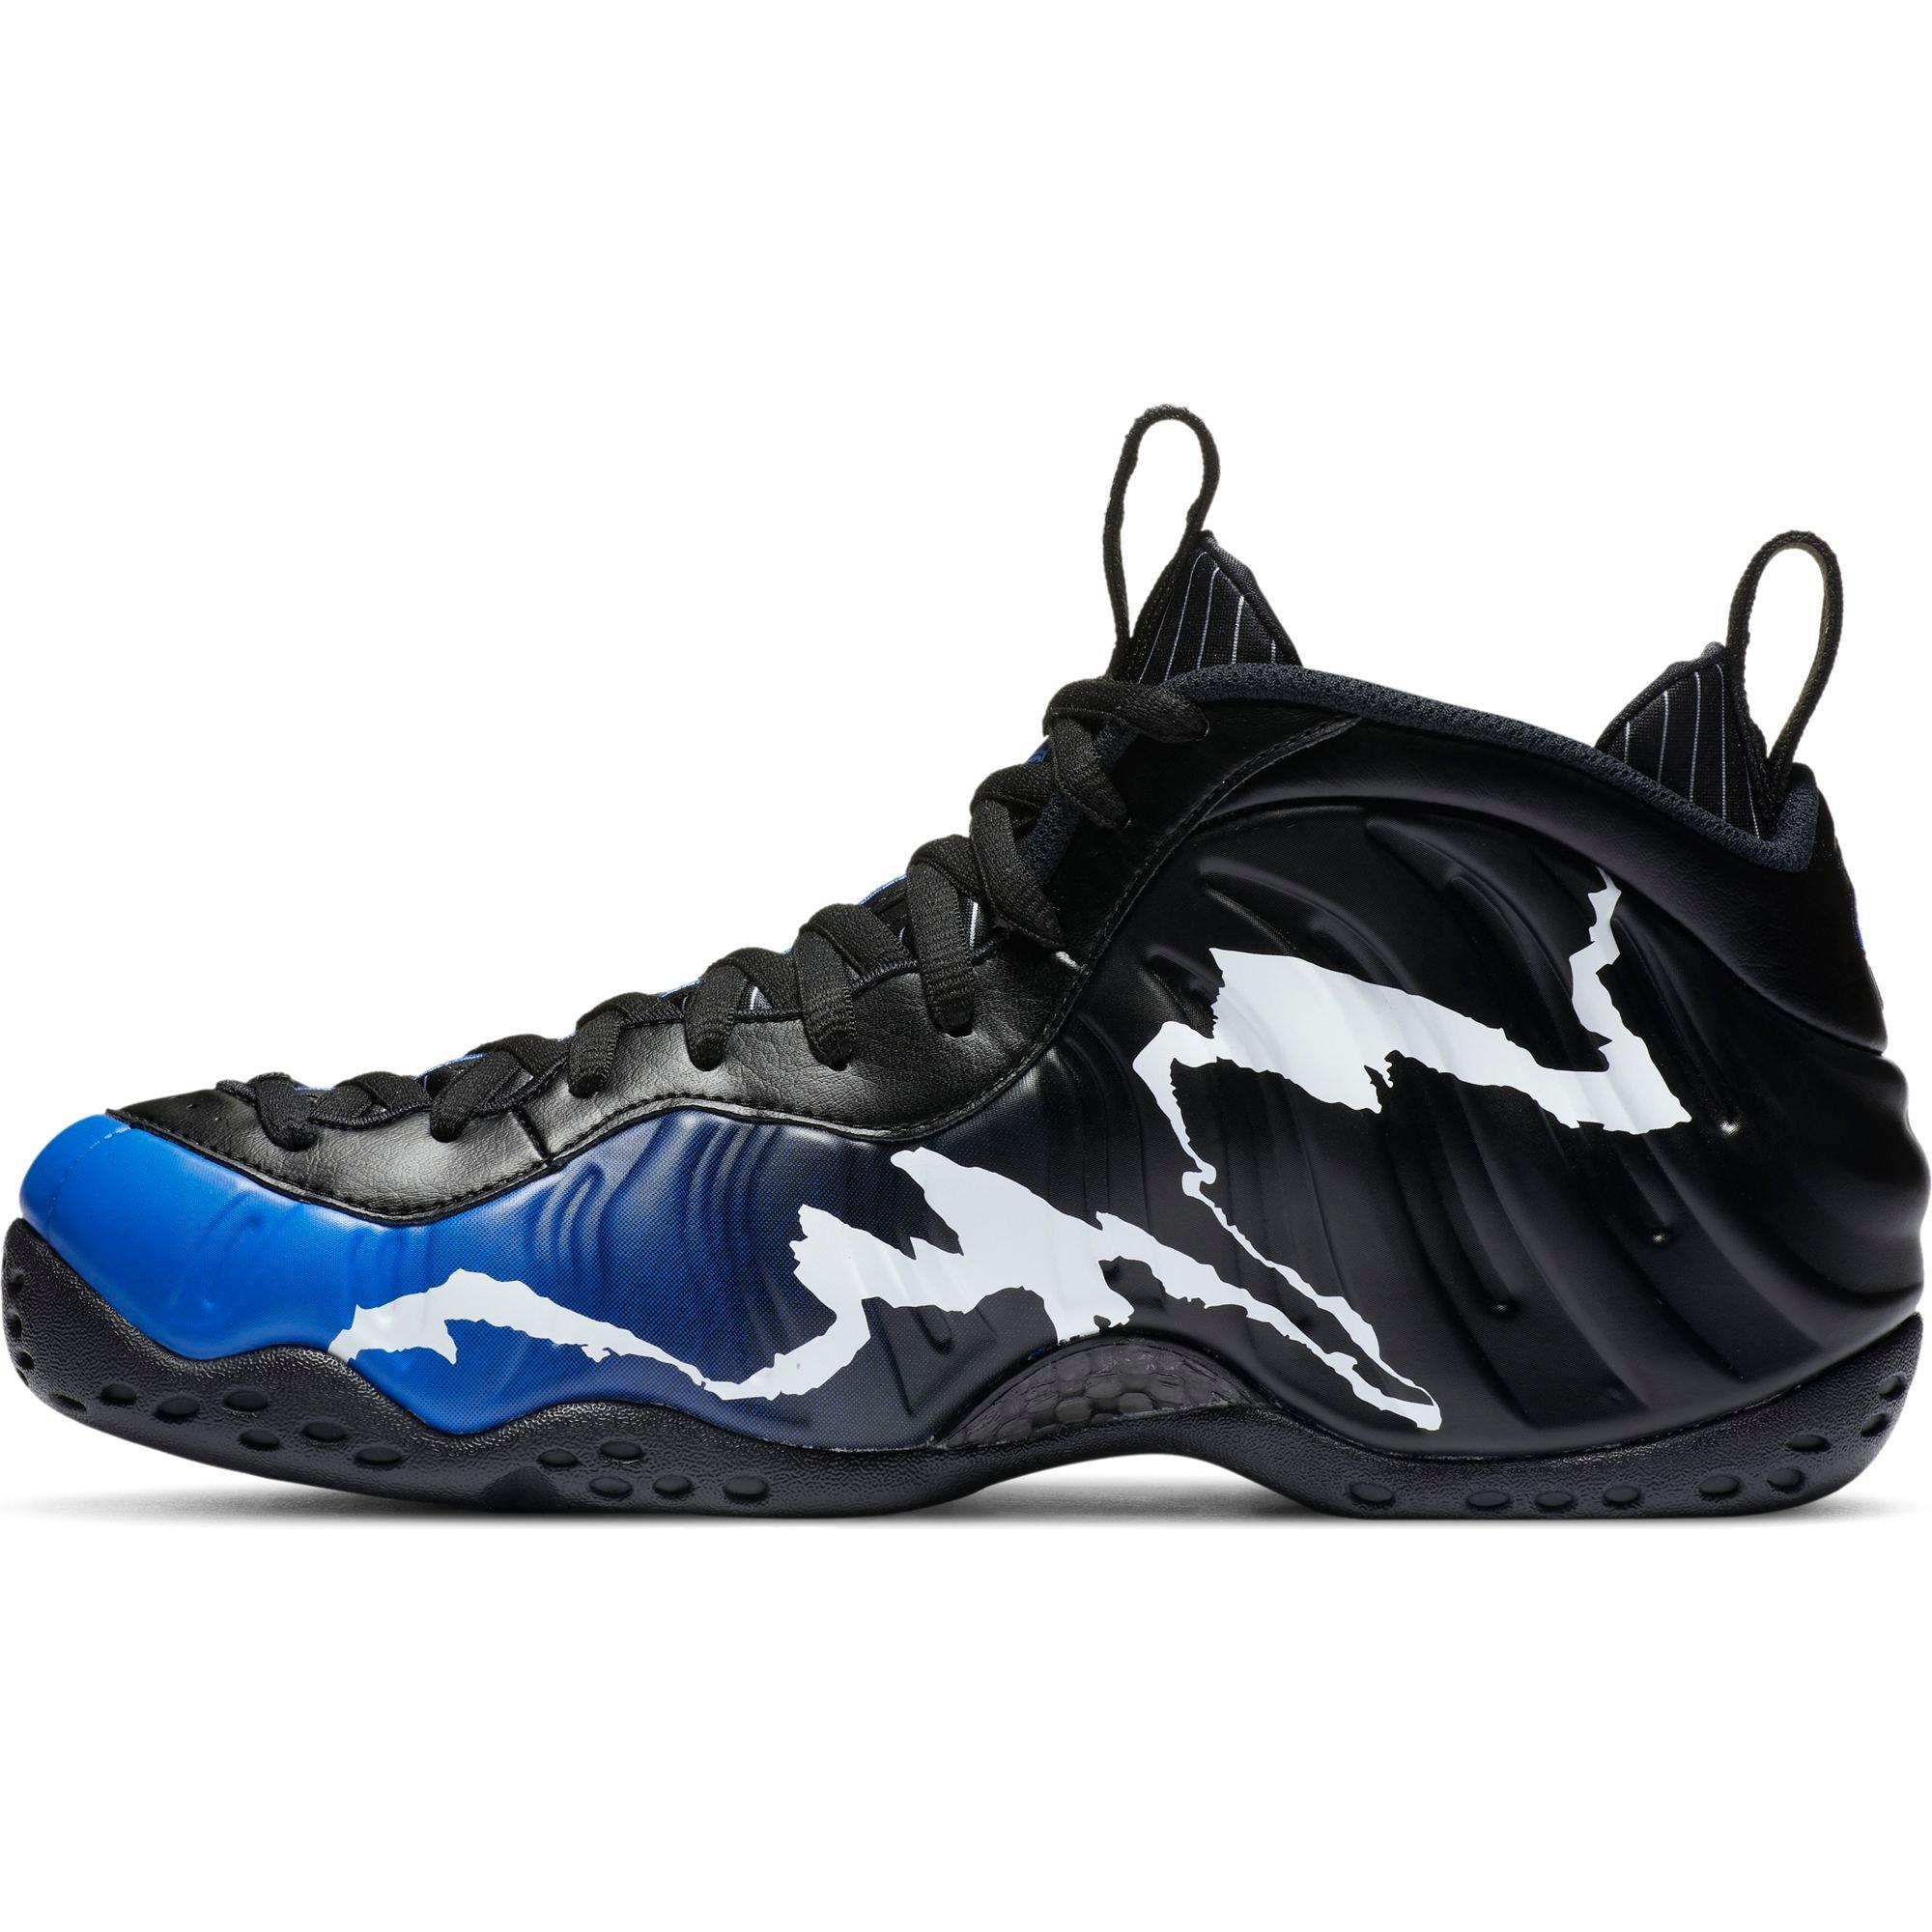 men's nike air foamposite one basketball shoes